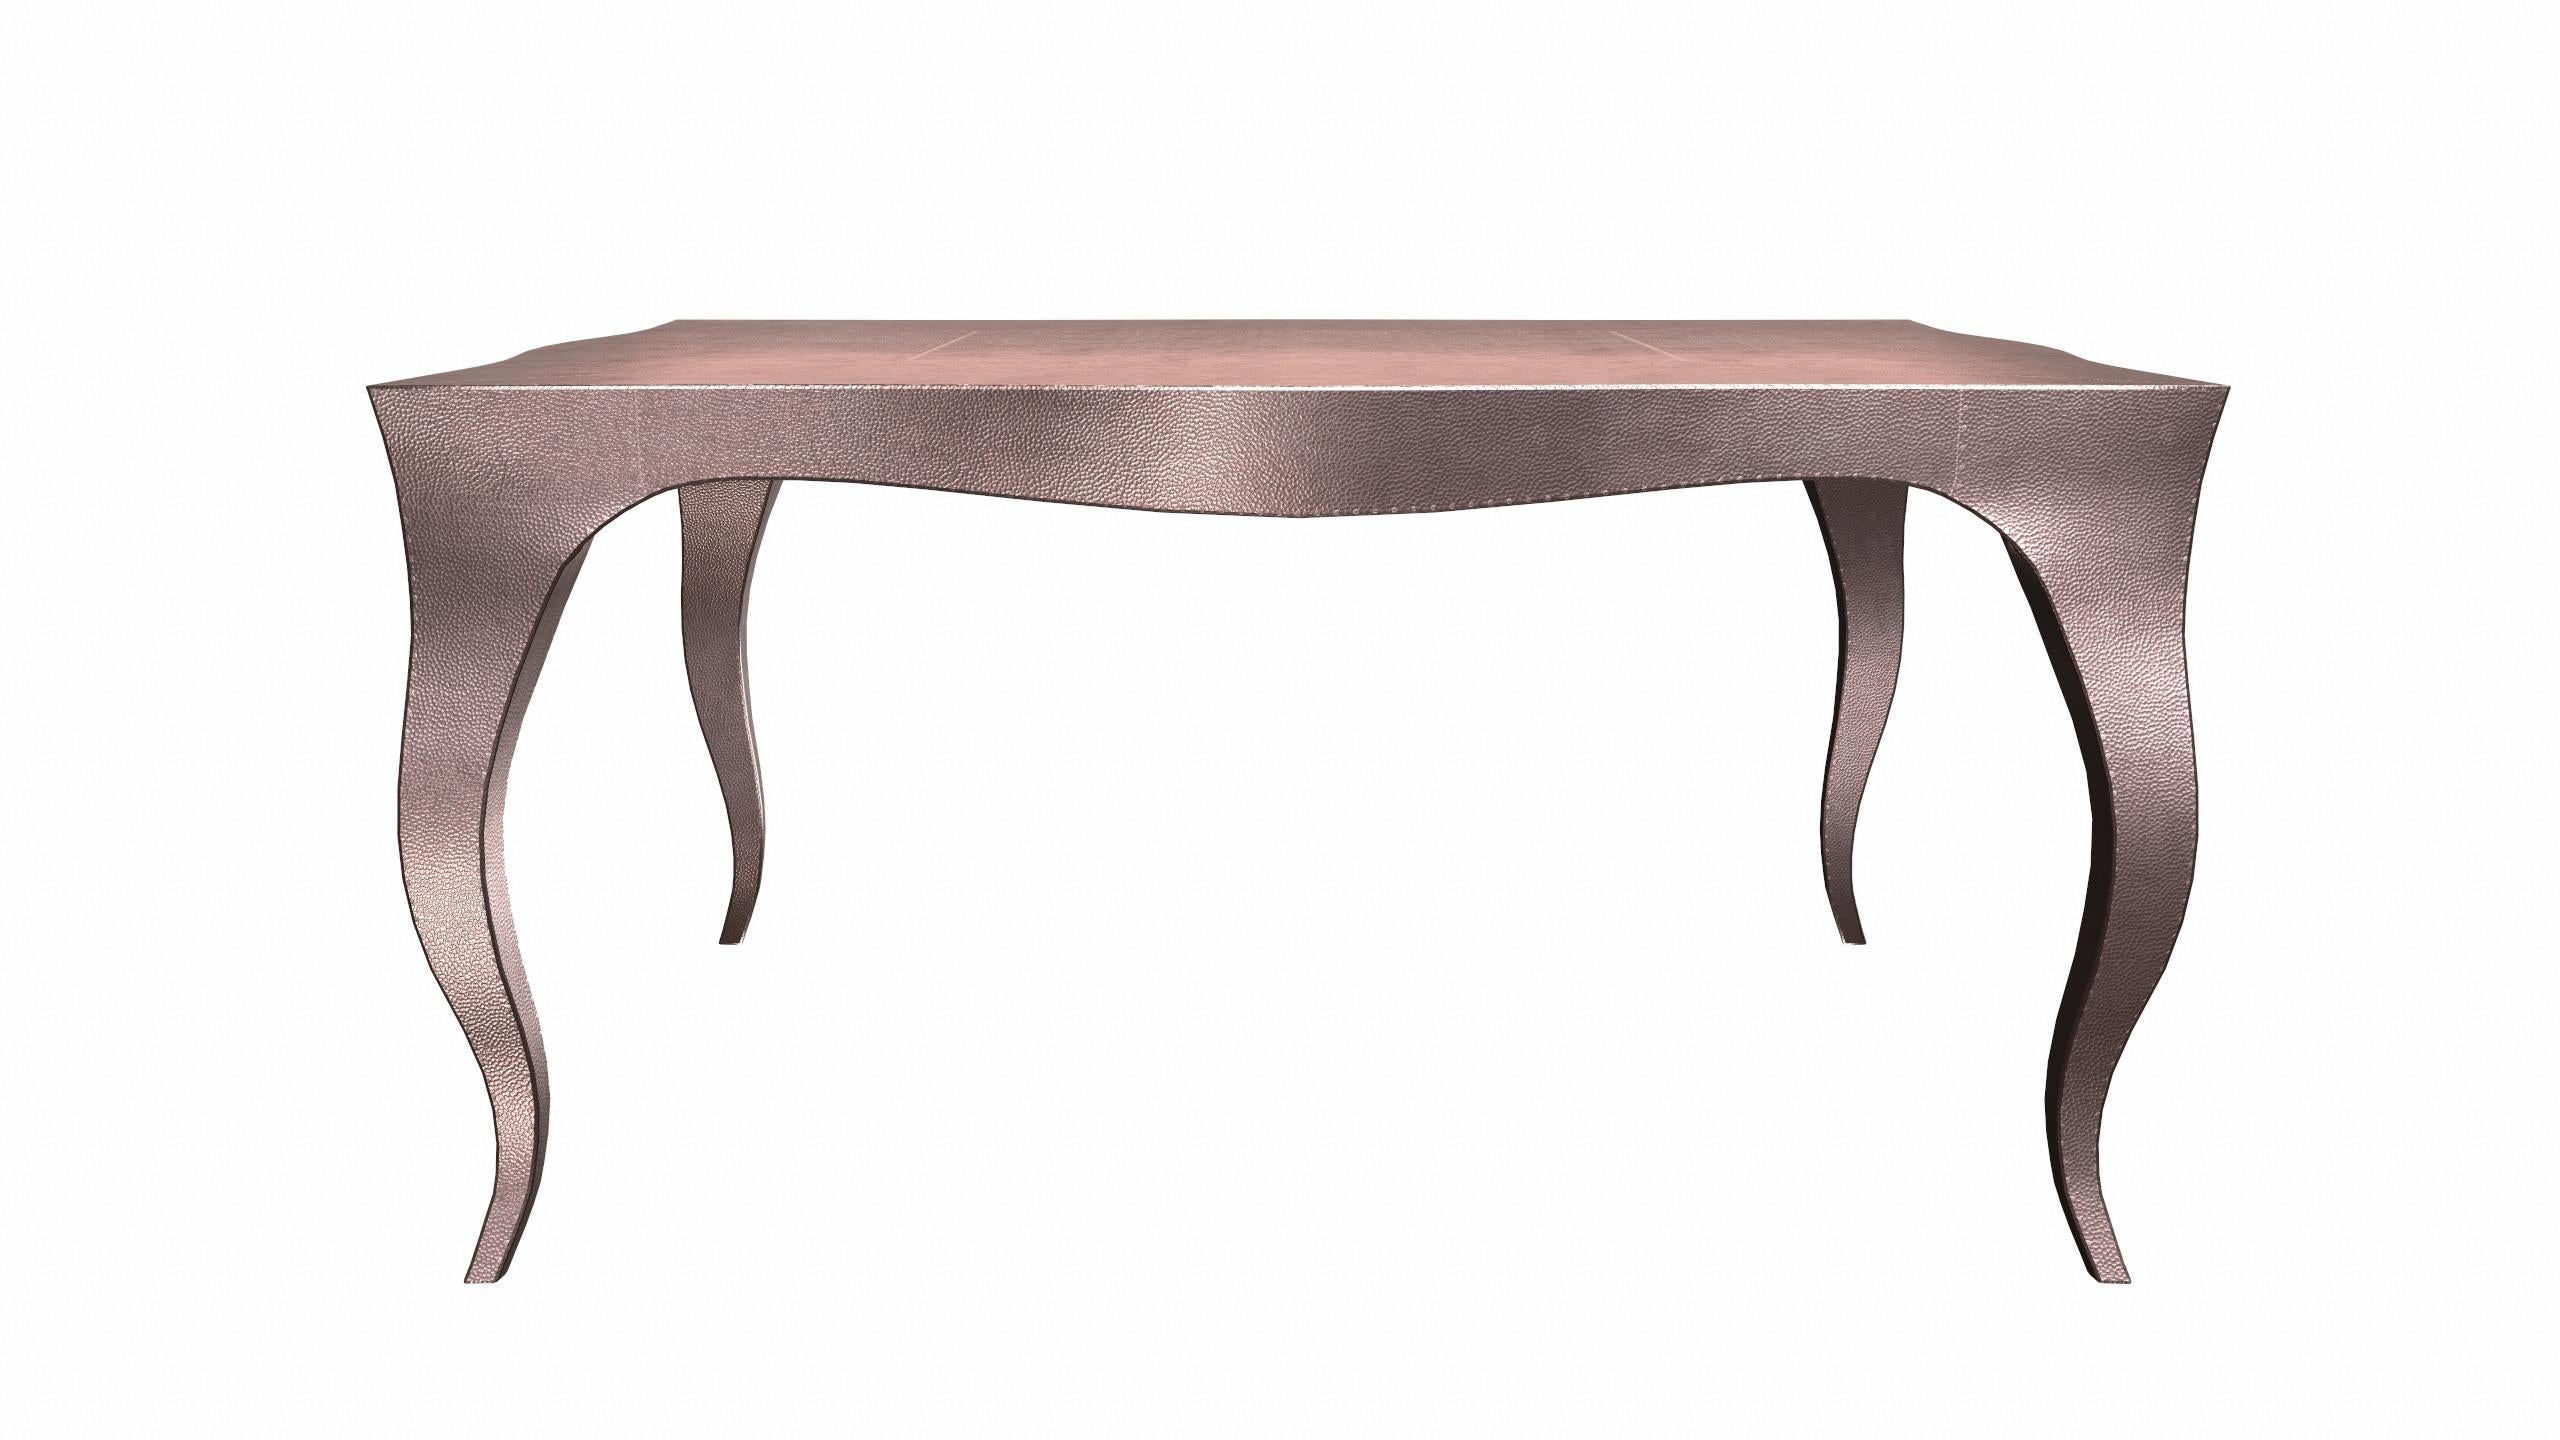 American Louise Art Deco Game Tables Mid. Hammered Copper by Paul Mathieu for S.Odegard For Sale